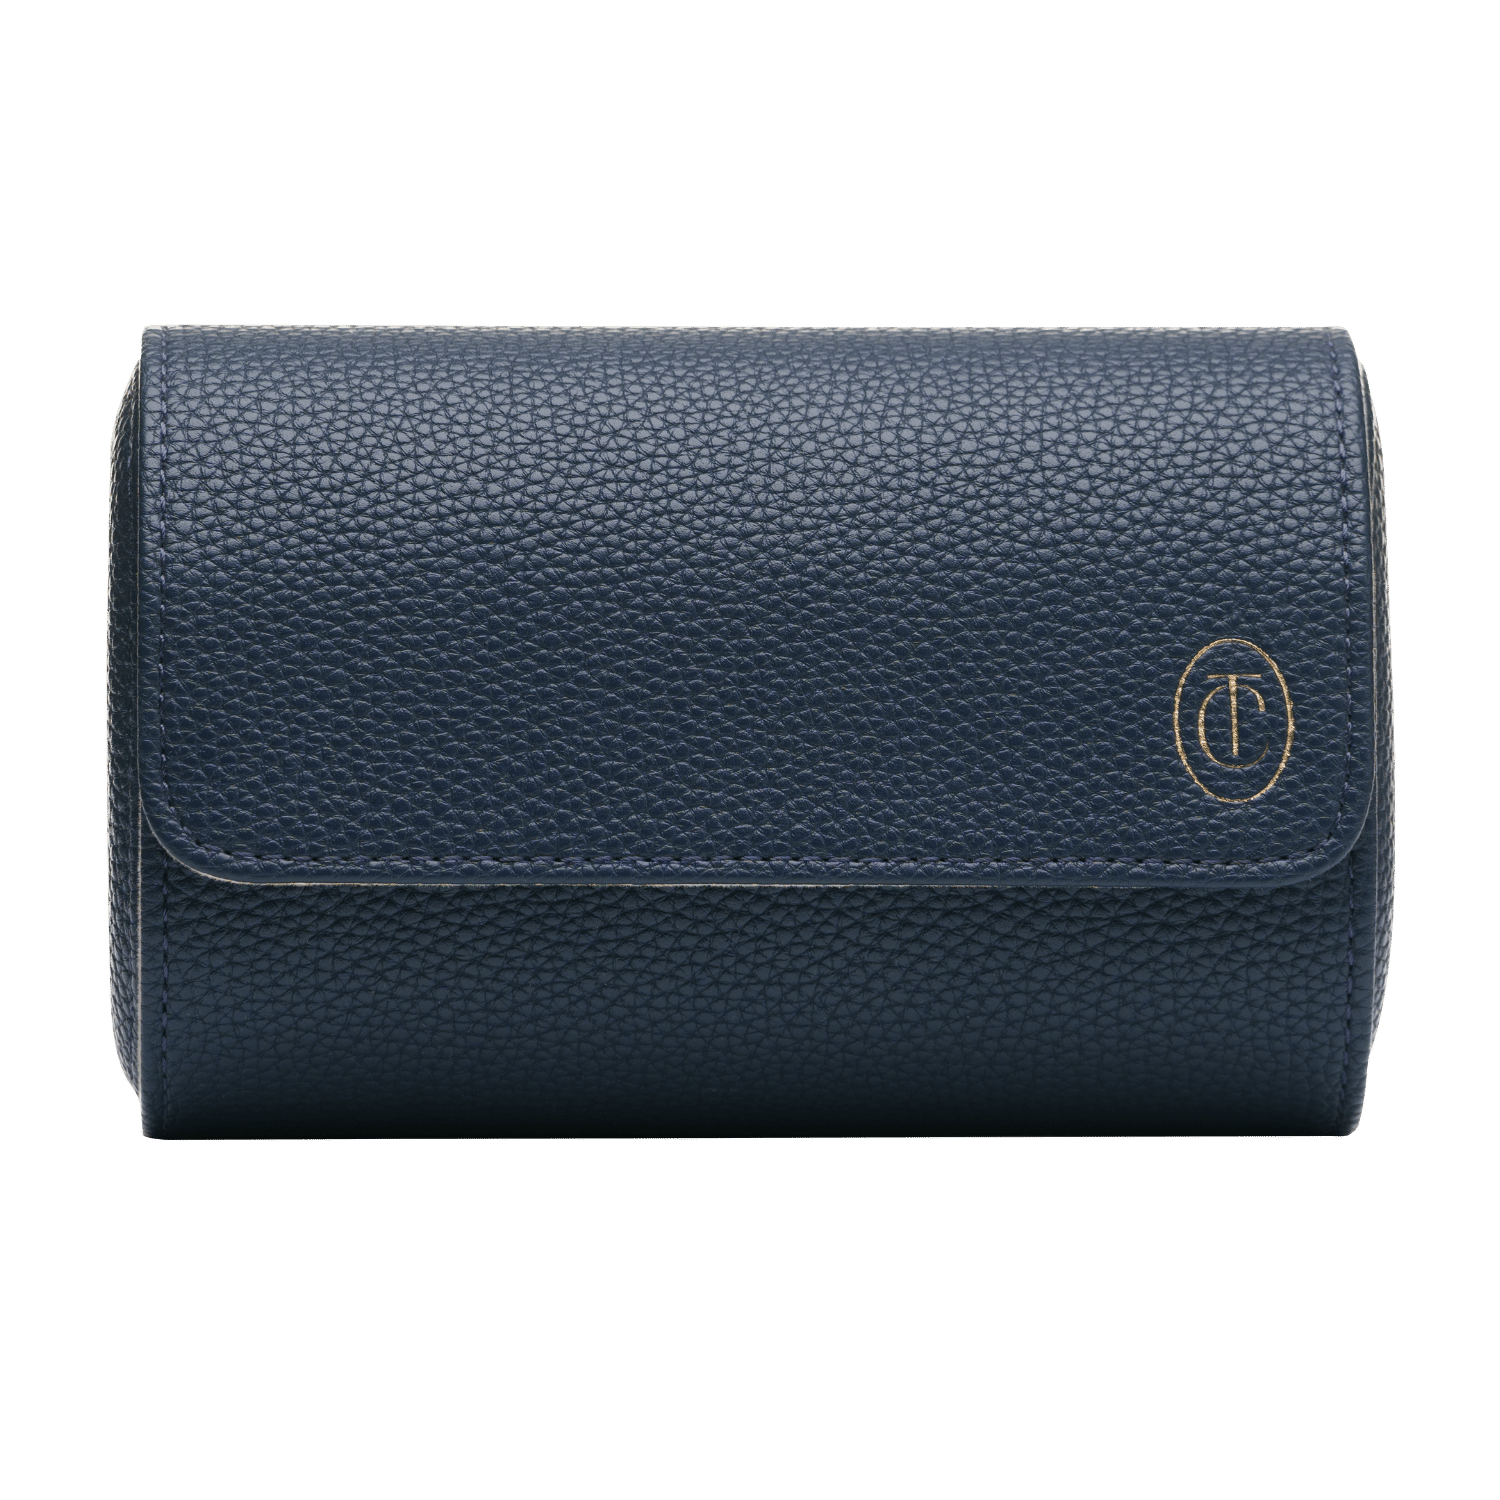 Double navy gold watch case